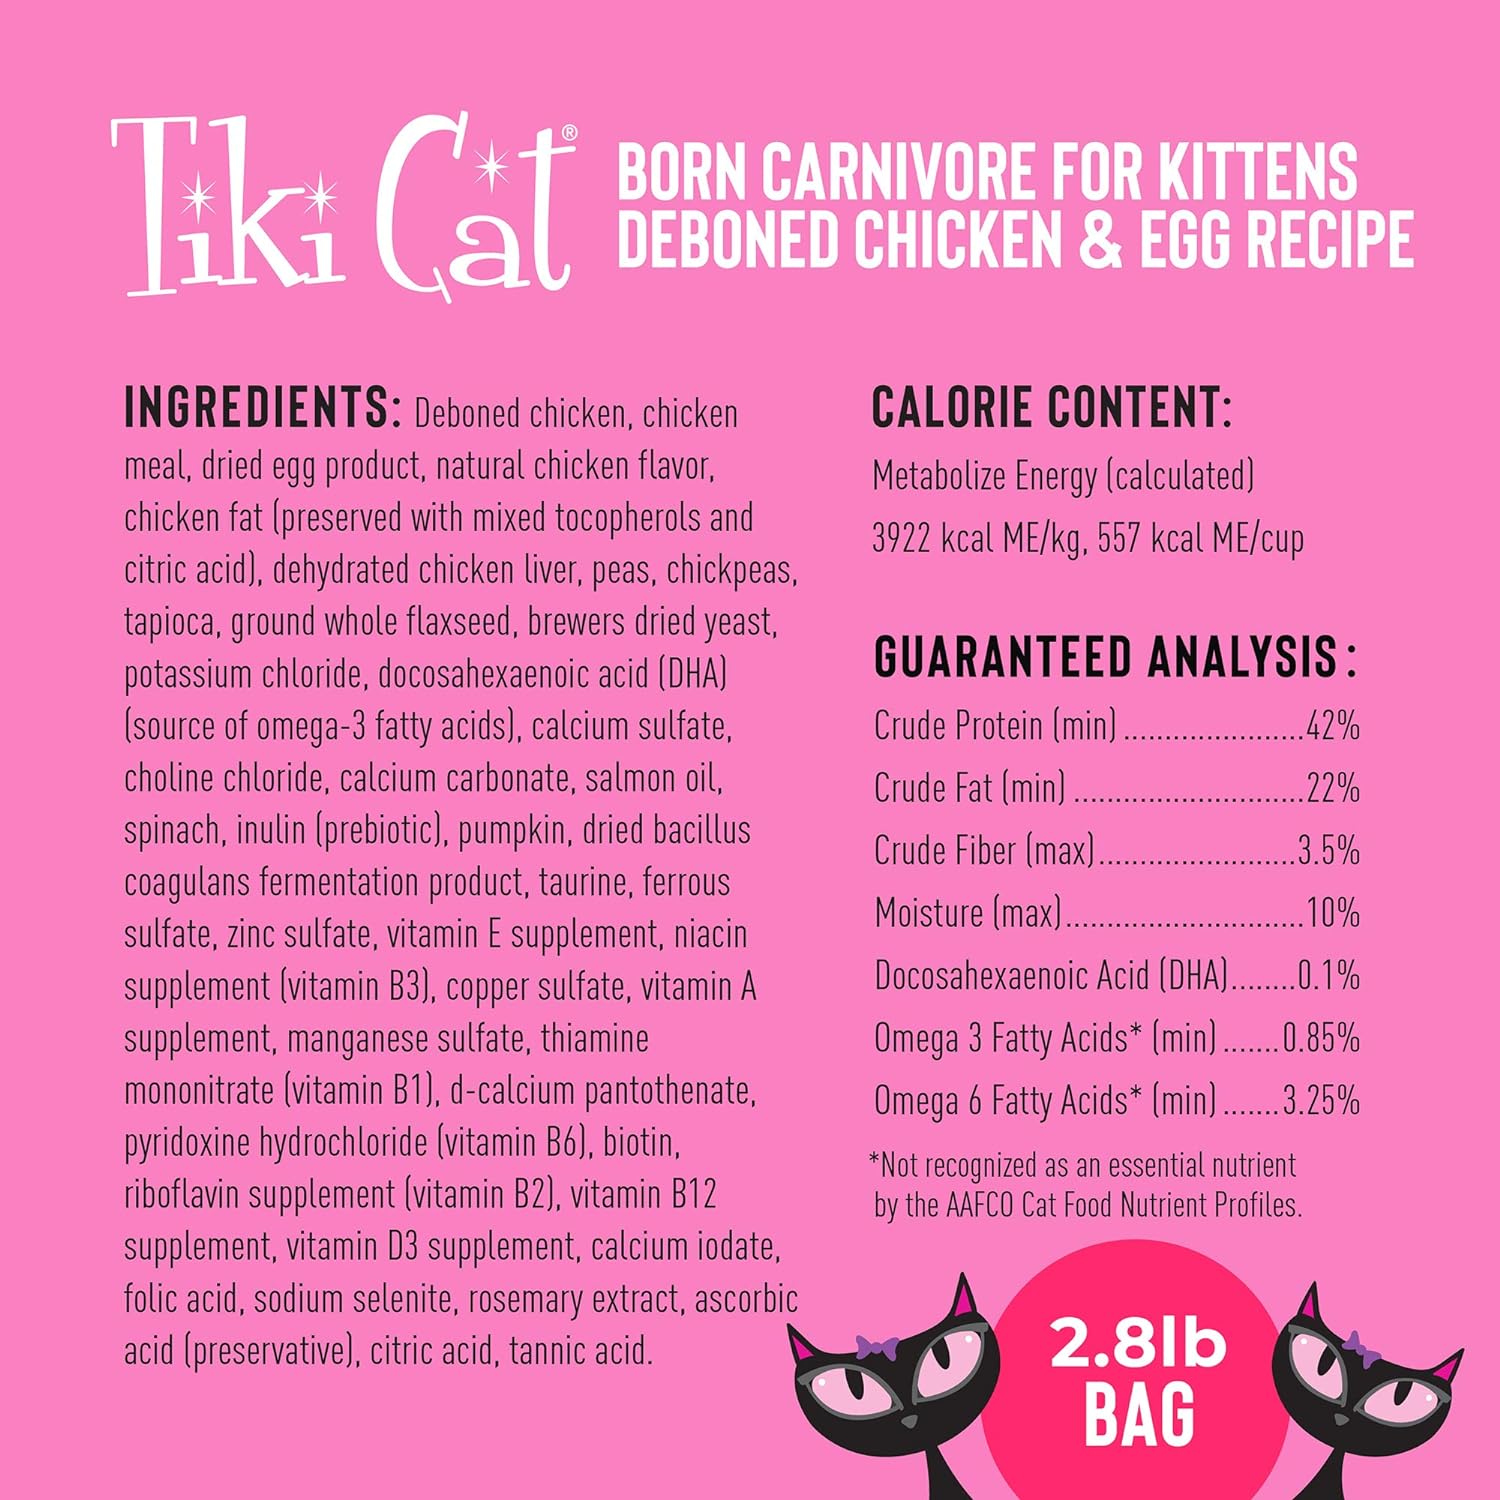 Kitten Dry Cat Food: A Comparative Review